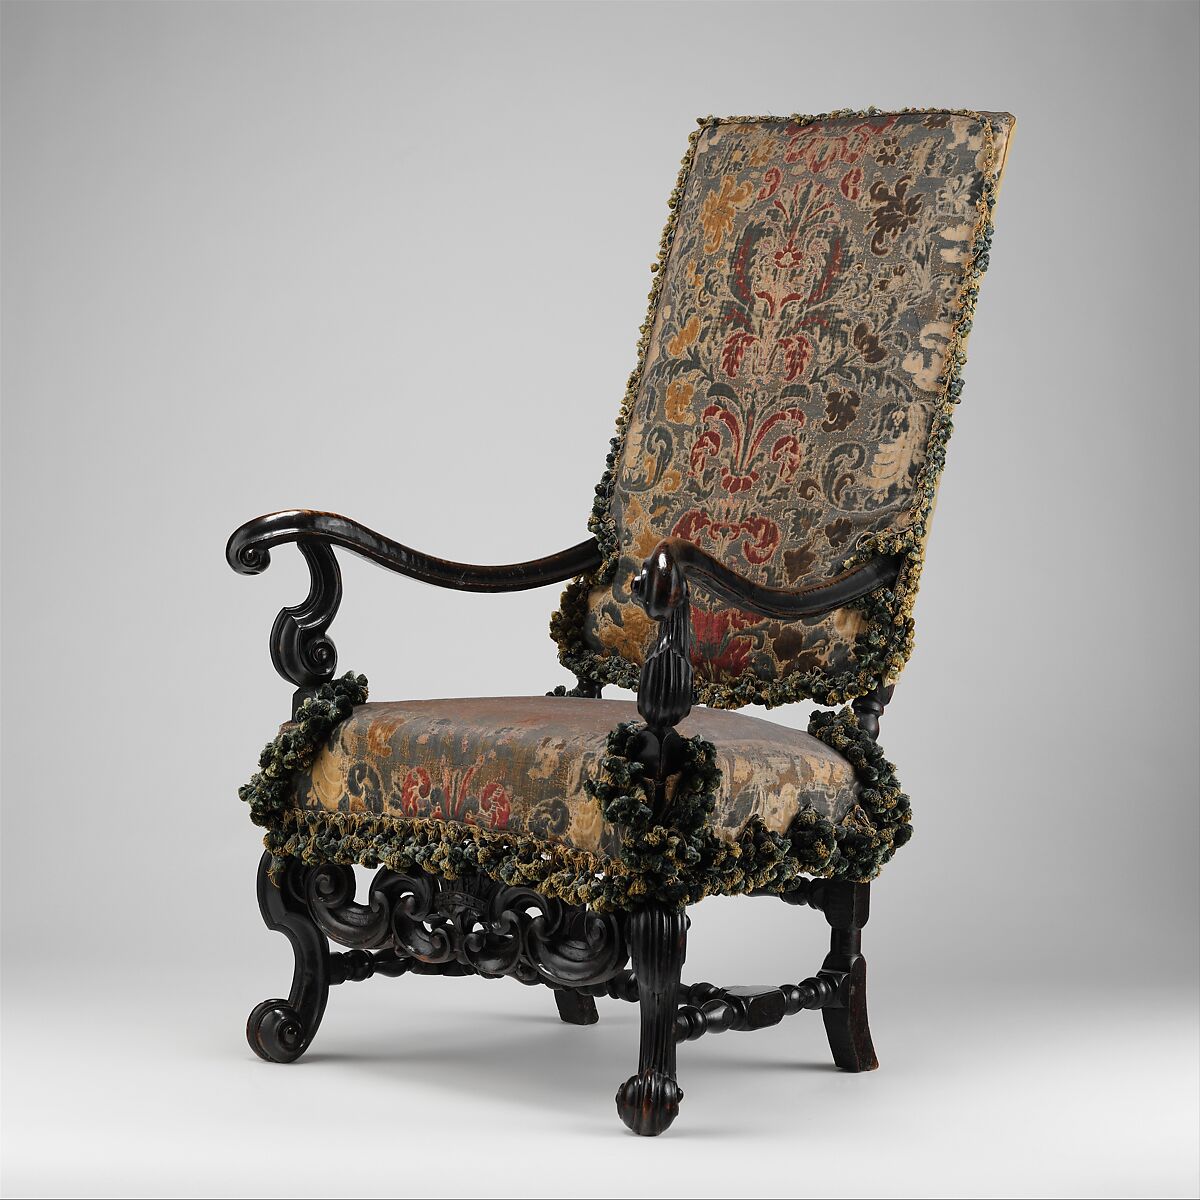 Upholstered armchair, originally from a set of eight, from Burley-on-the-Hill, Rutland (one of a pair), Attributed to Thomas Roberts (active 1685–1714), Ebonized beechwood, Genoese velvet covers original to the chair, British 